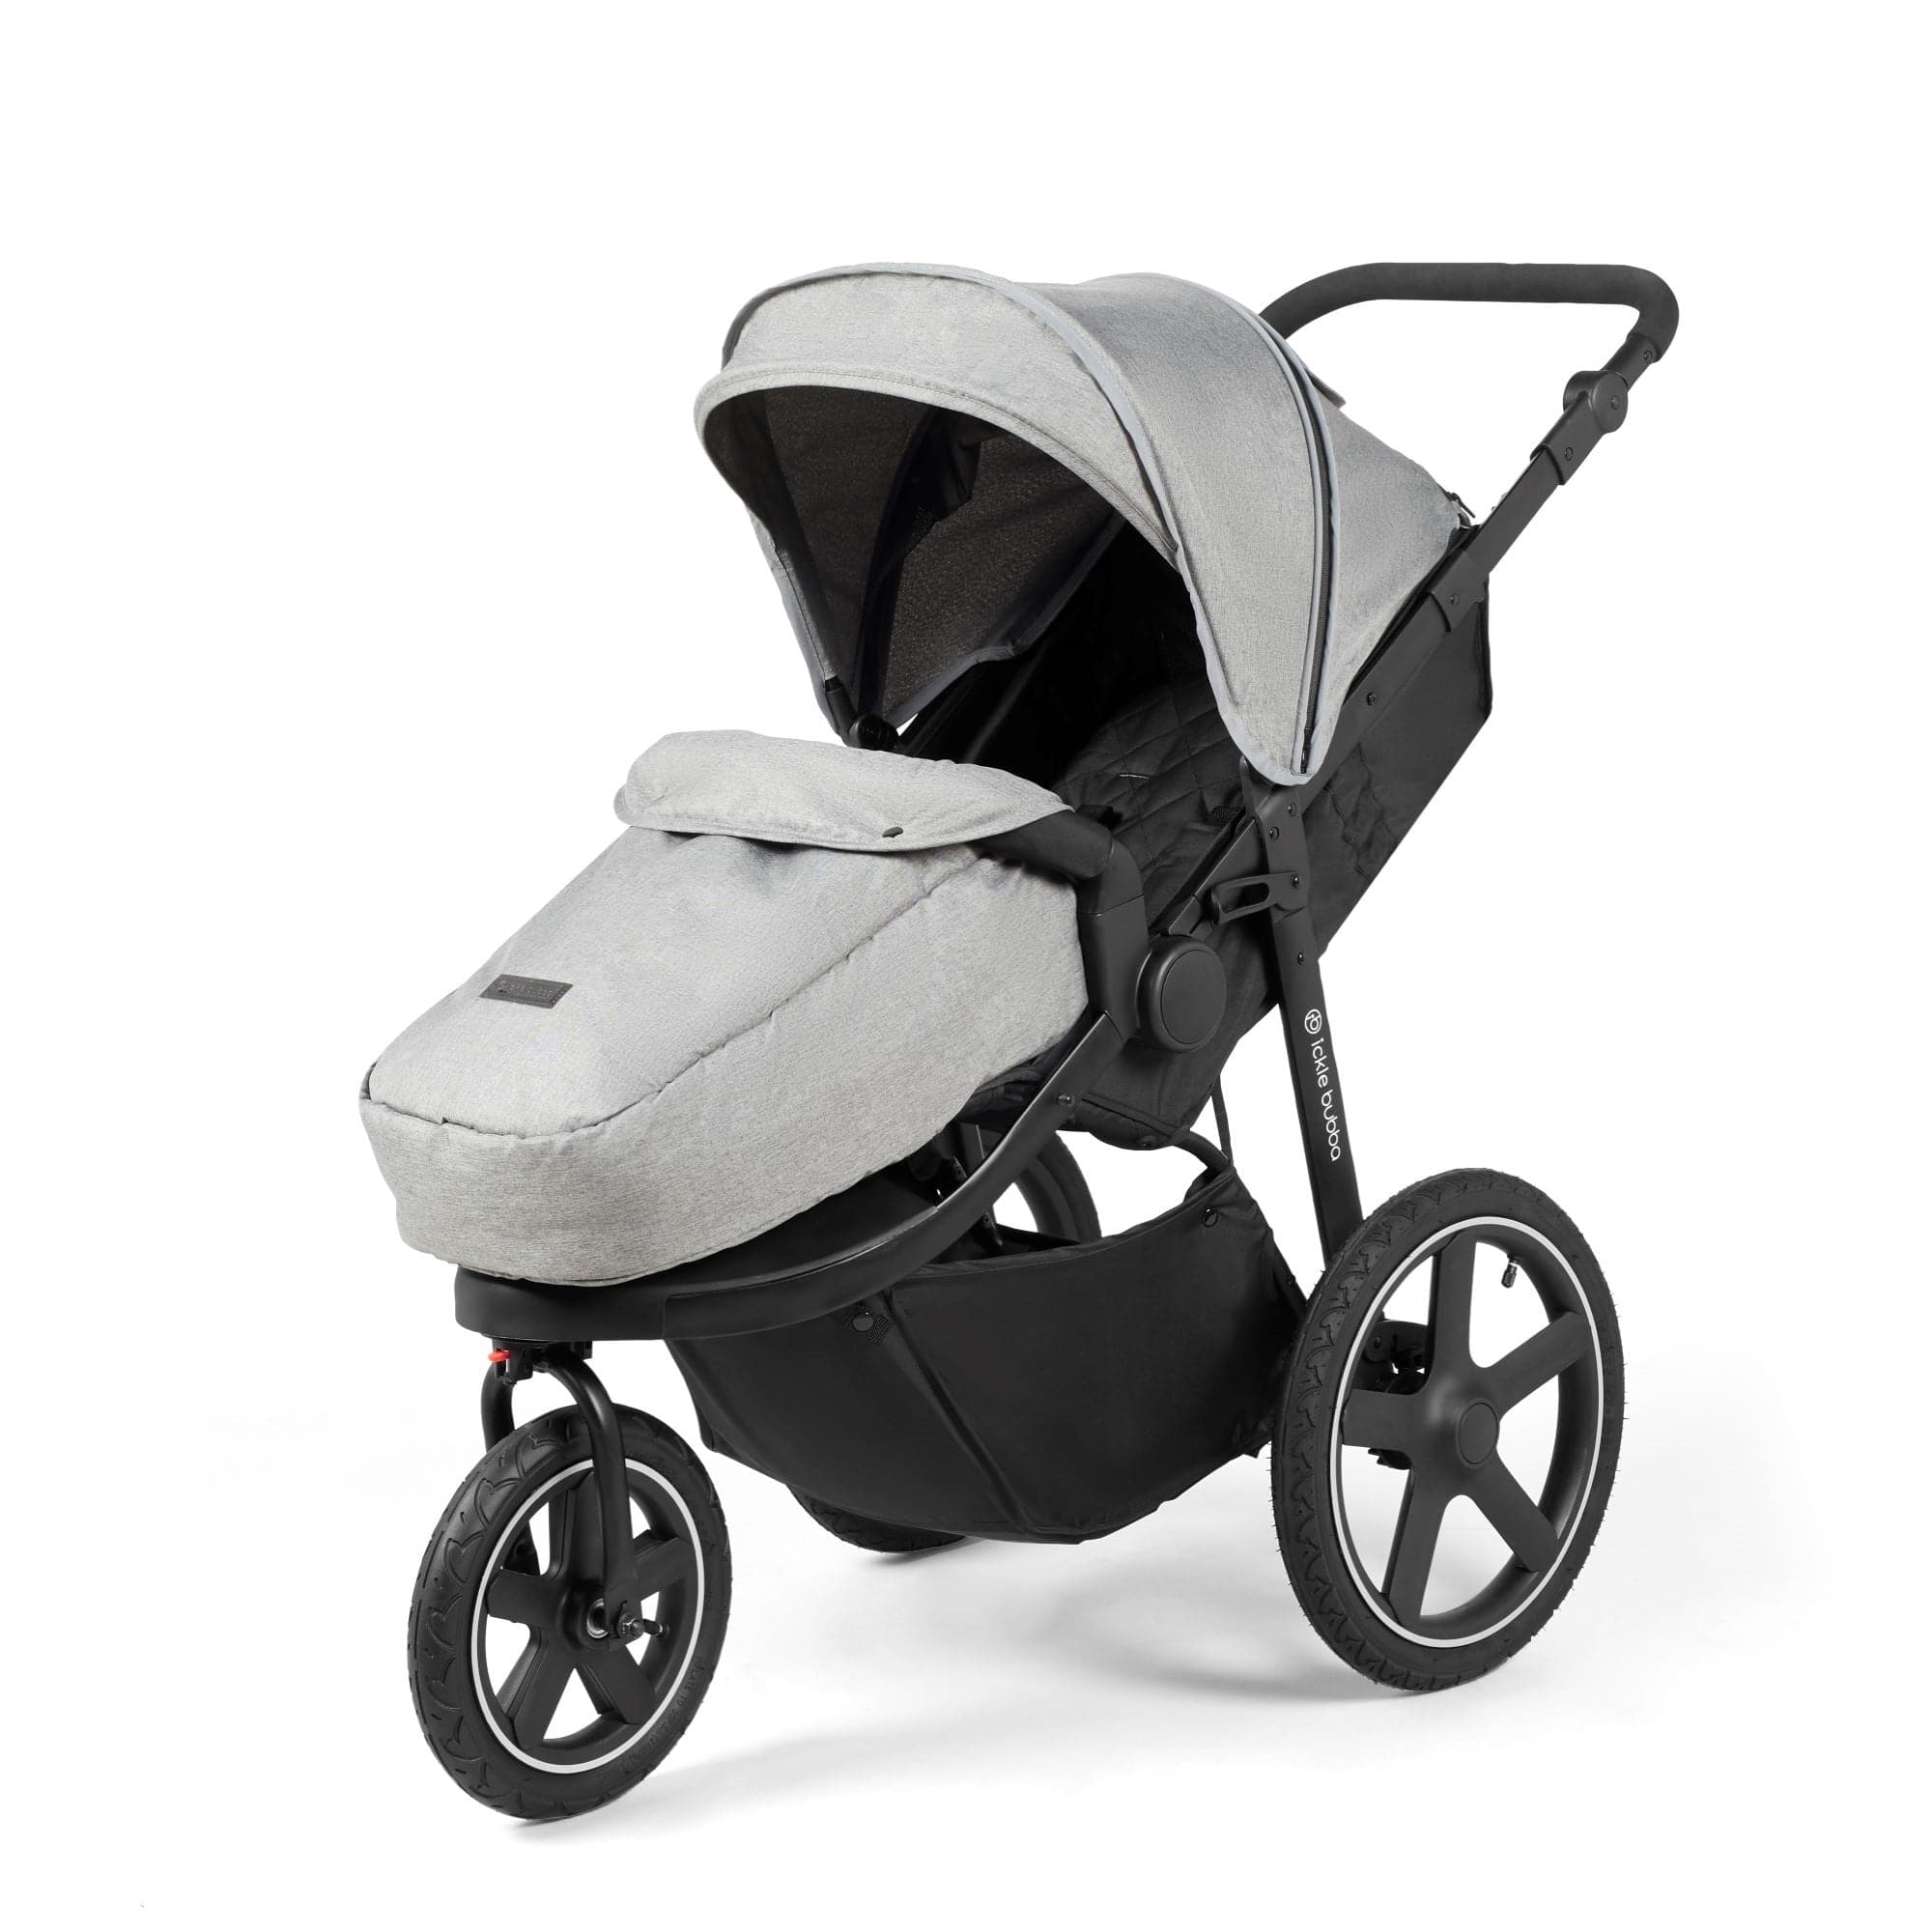 Ickle Bubba Venus Venus Max Jogger Stroller I-Size Travel System with Isofix Base - Space Grey -  | For Your Little One